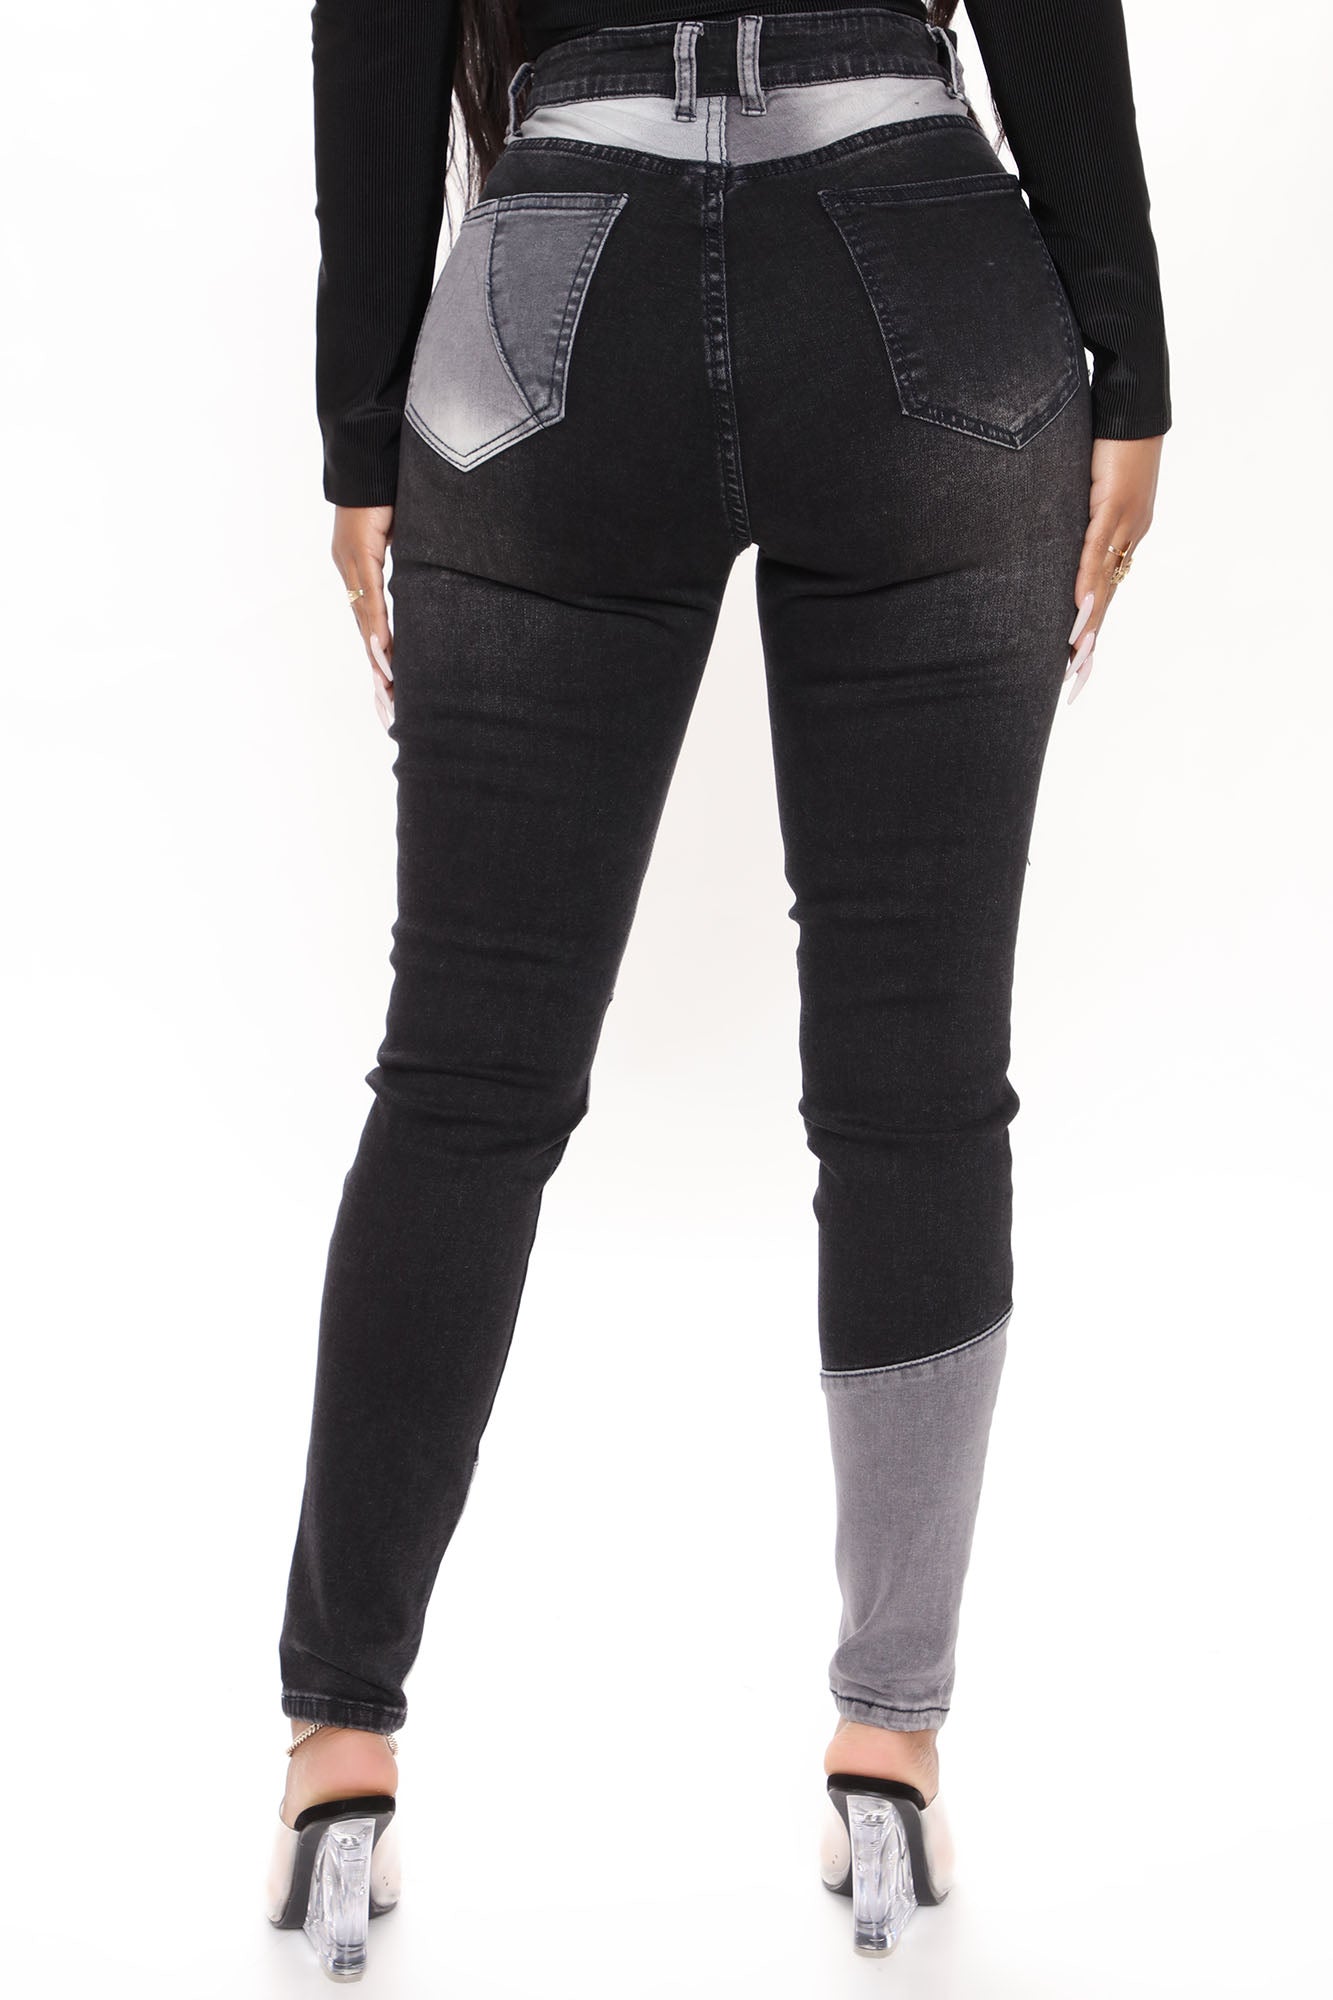 All Fixed Up Patchwork Skinny Jeans - Black/combo